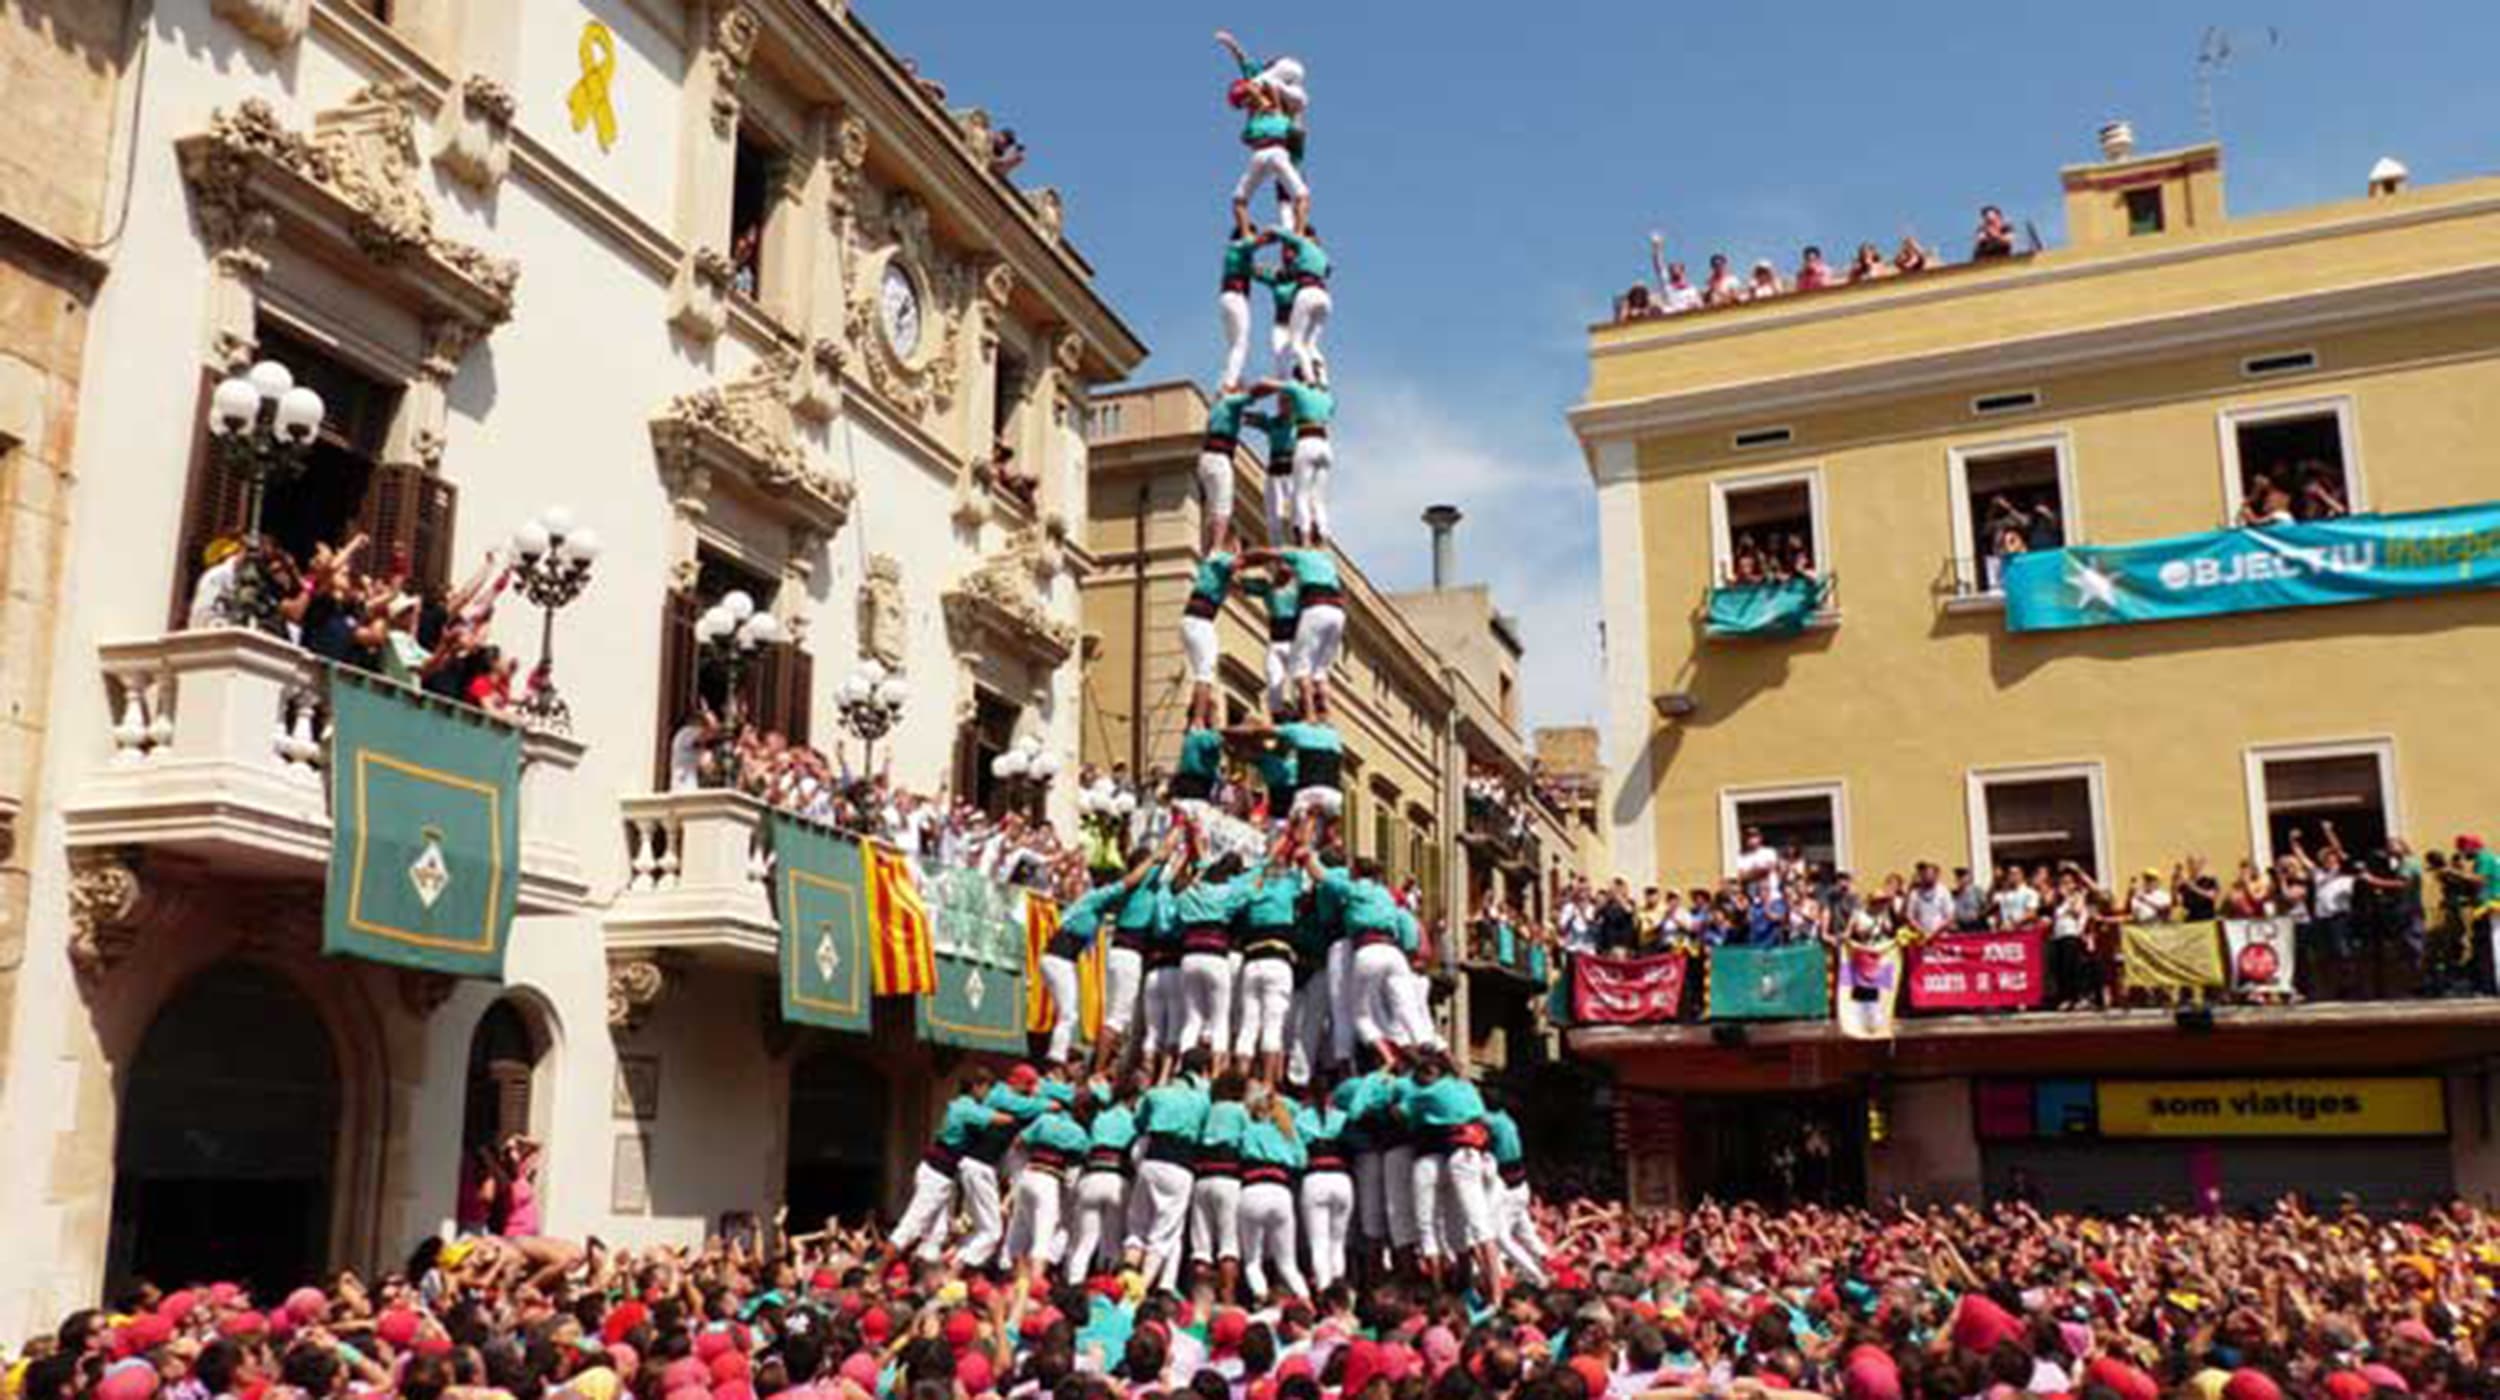 A human tower in Catalonia.